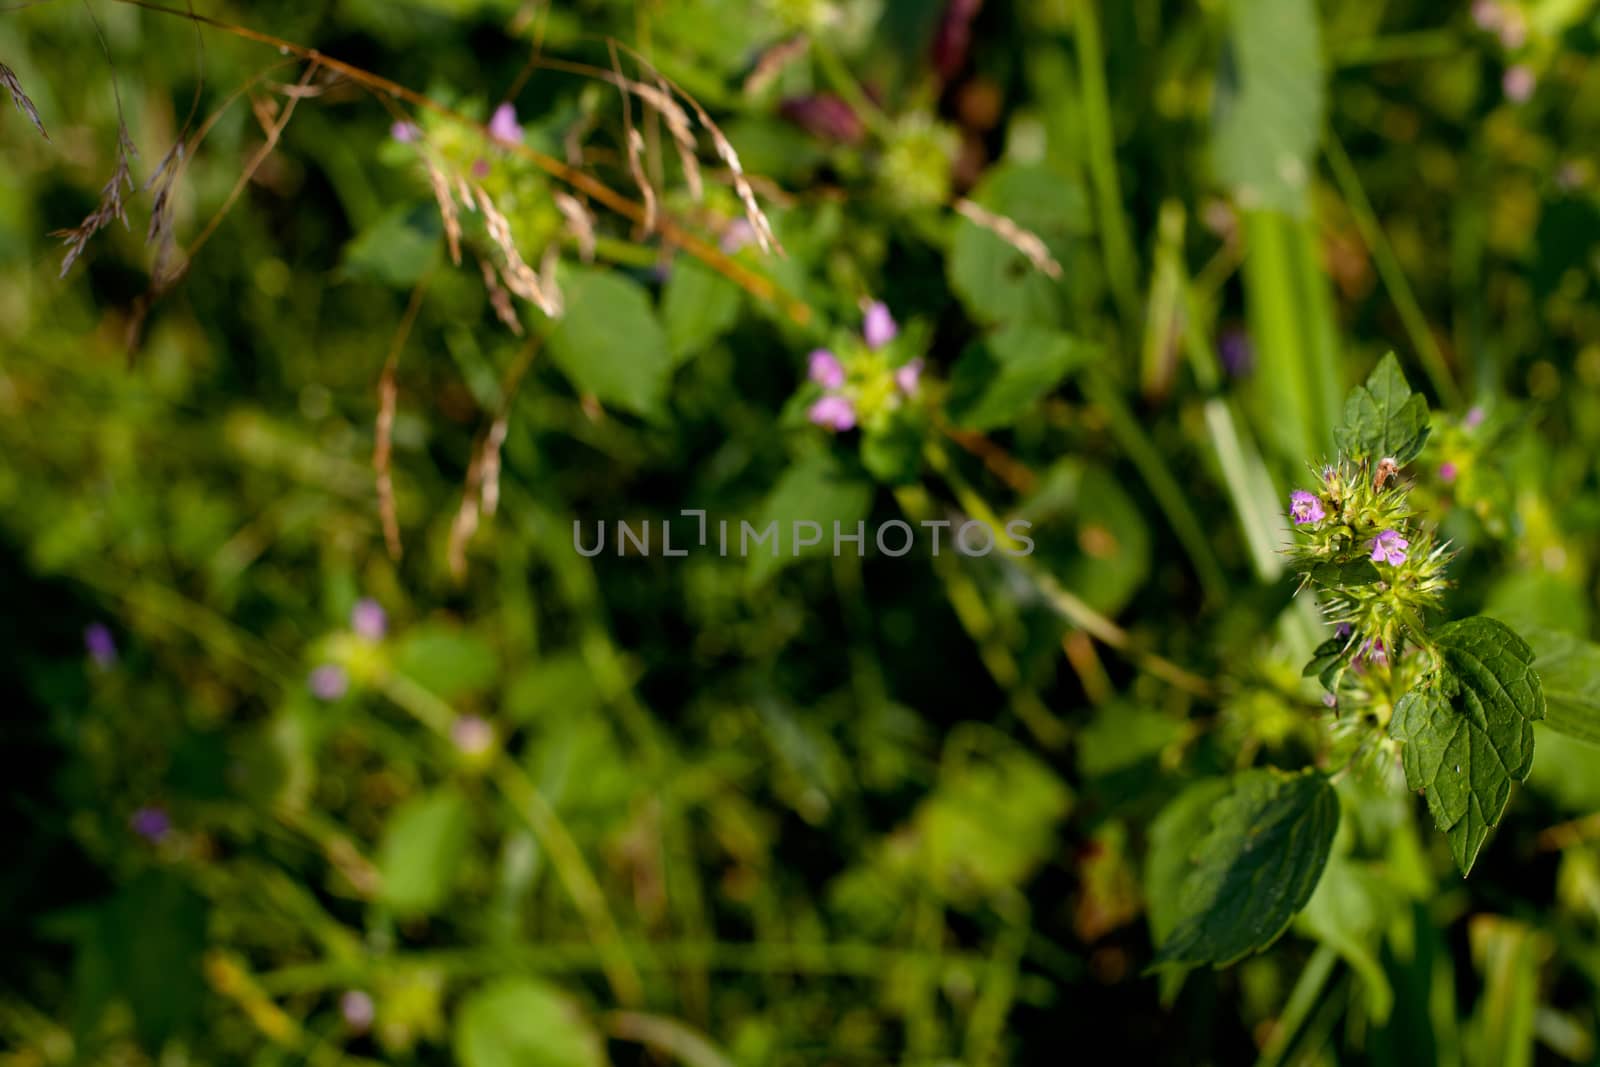 Lilac wildflower in green field in sunny day
